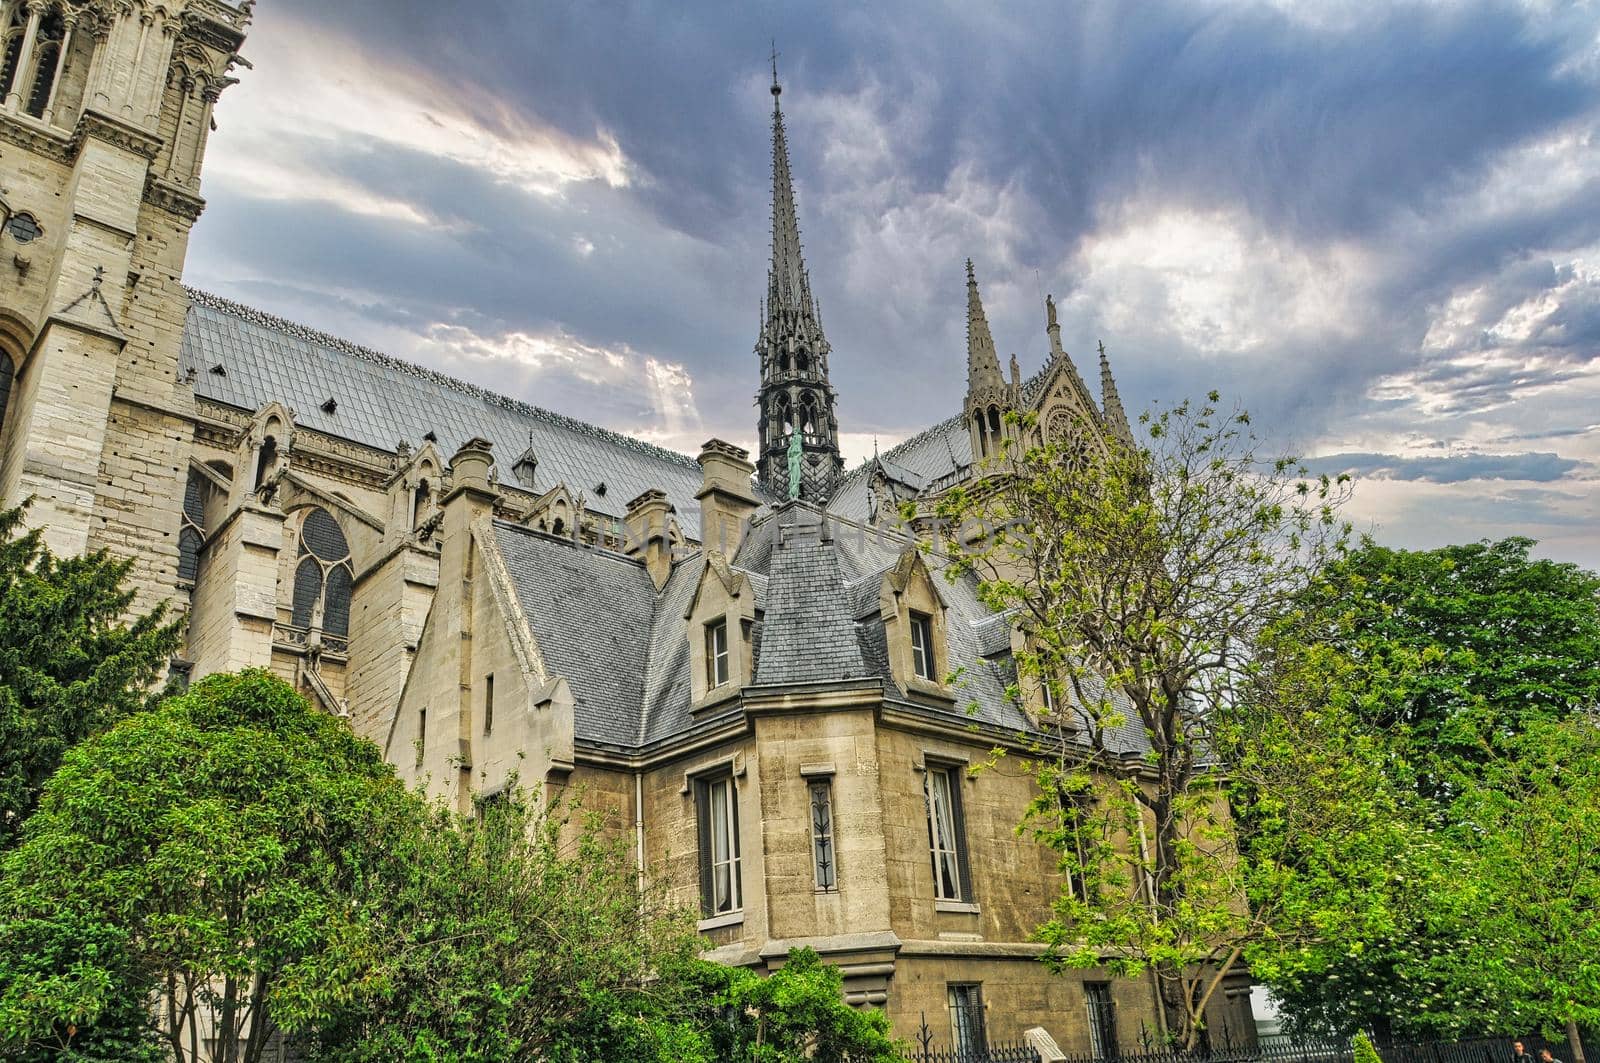 Cathedral notre dame, famous city of Paris in France, rich in history and full of wonderful attractions and monuments